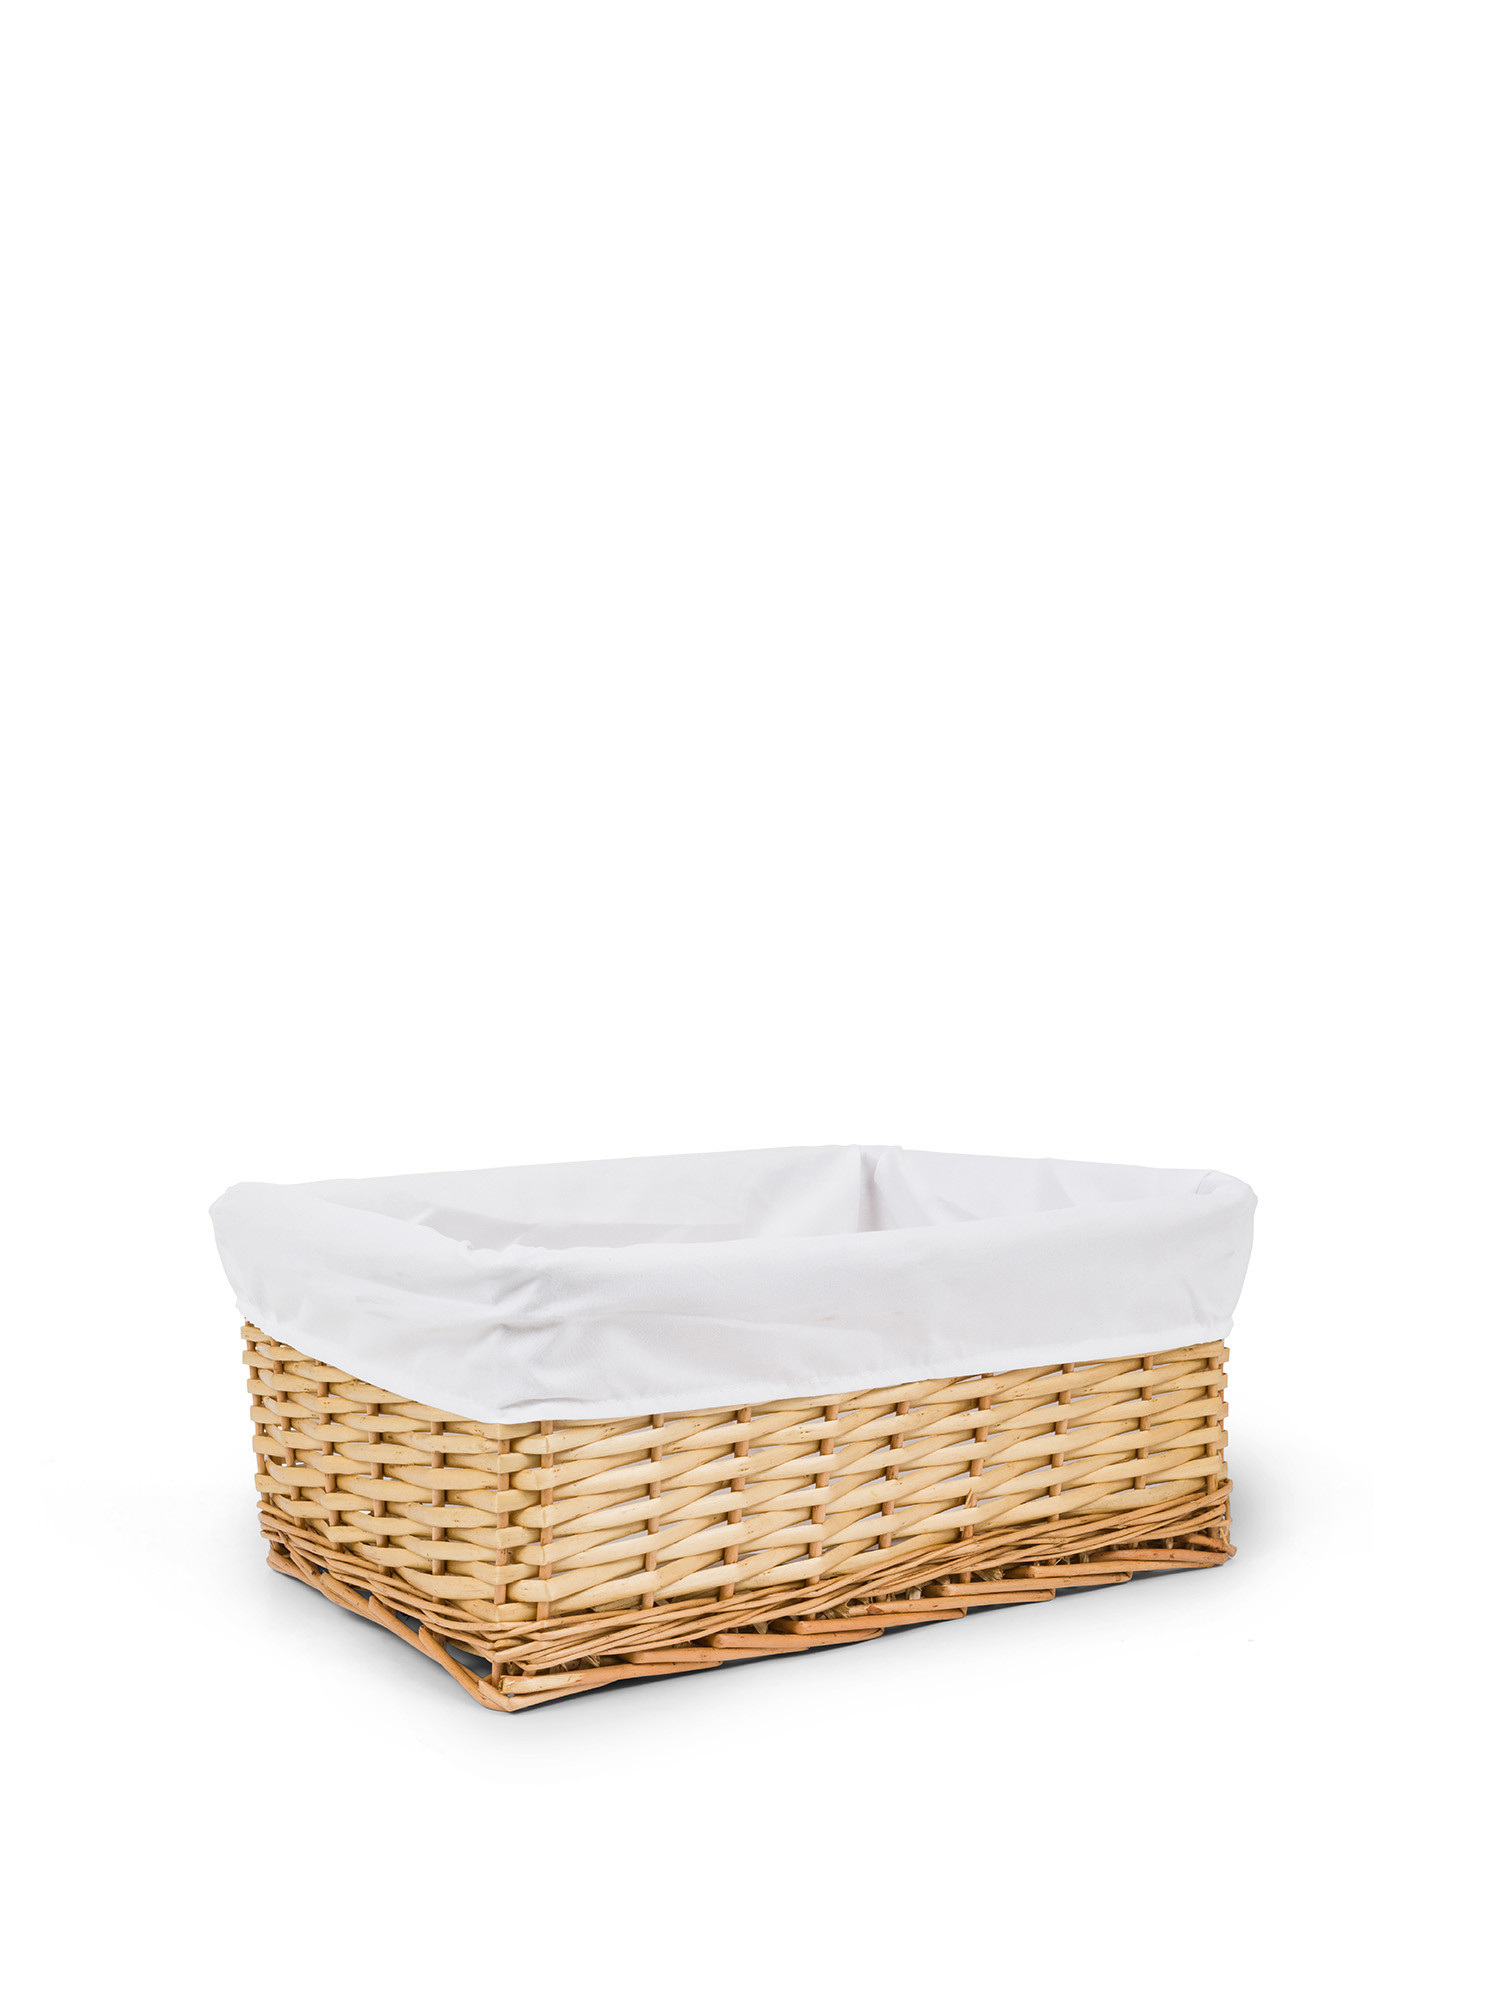 Wicker basket with lining, Natural, large image number 0